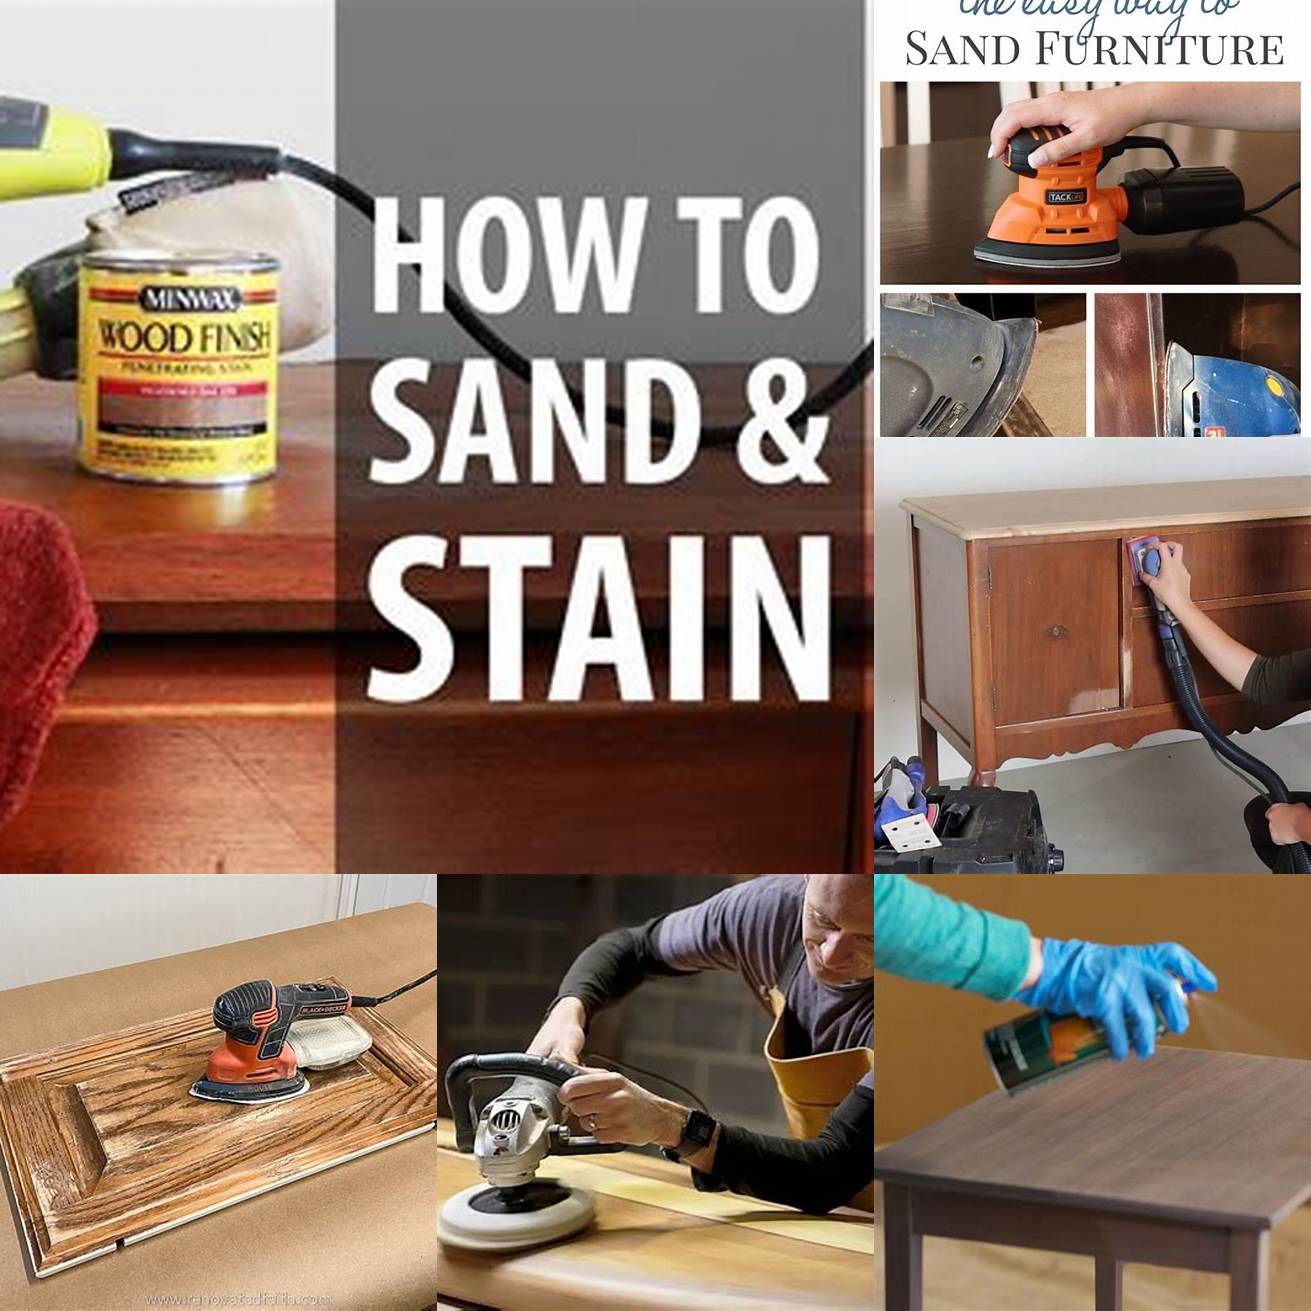 How to Sand